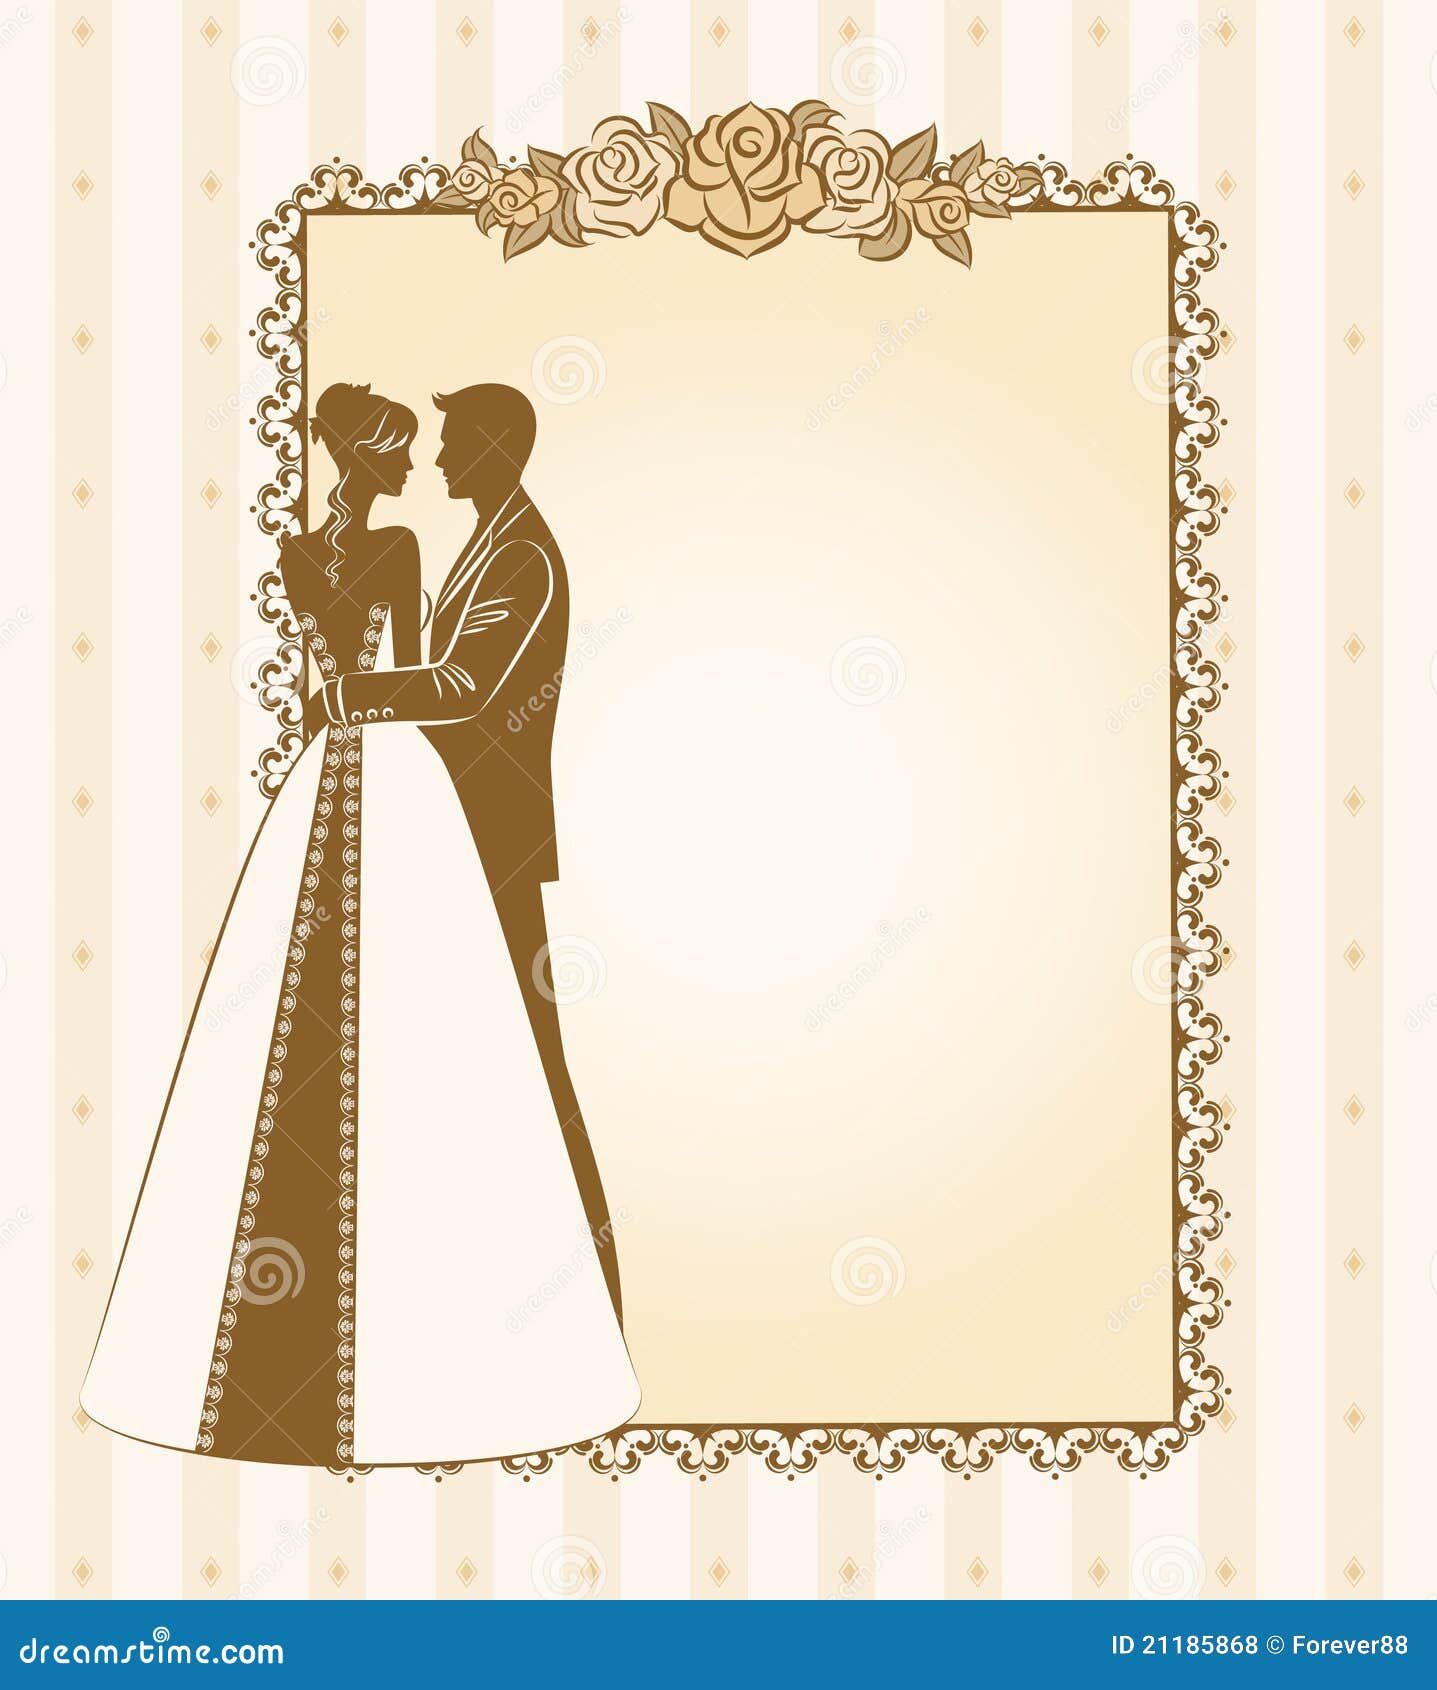 Bride And Groom's Silhouette Stock Vector - Illustration 